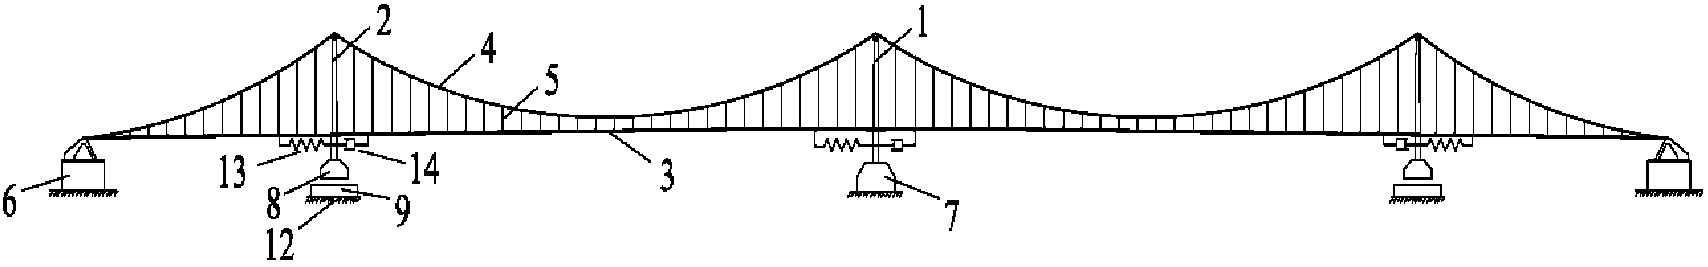 Three-tower suspension bridge with seism-isolating foundations